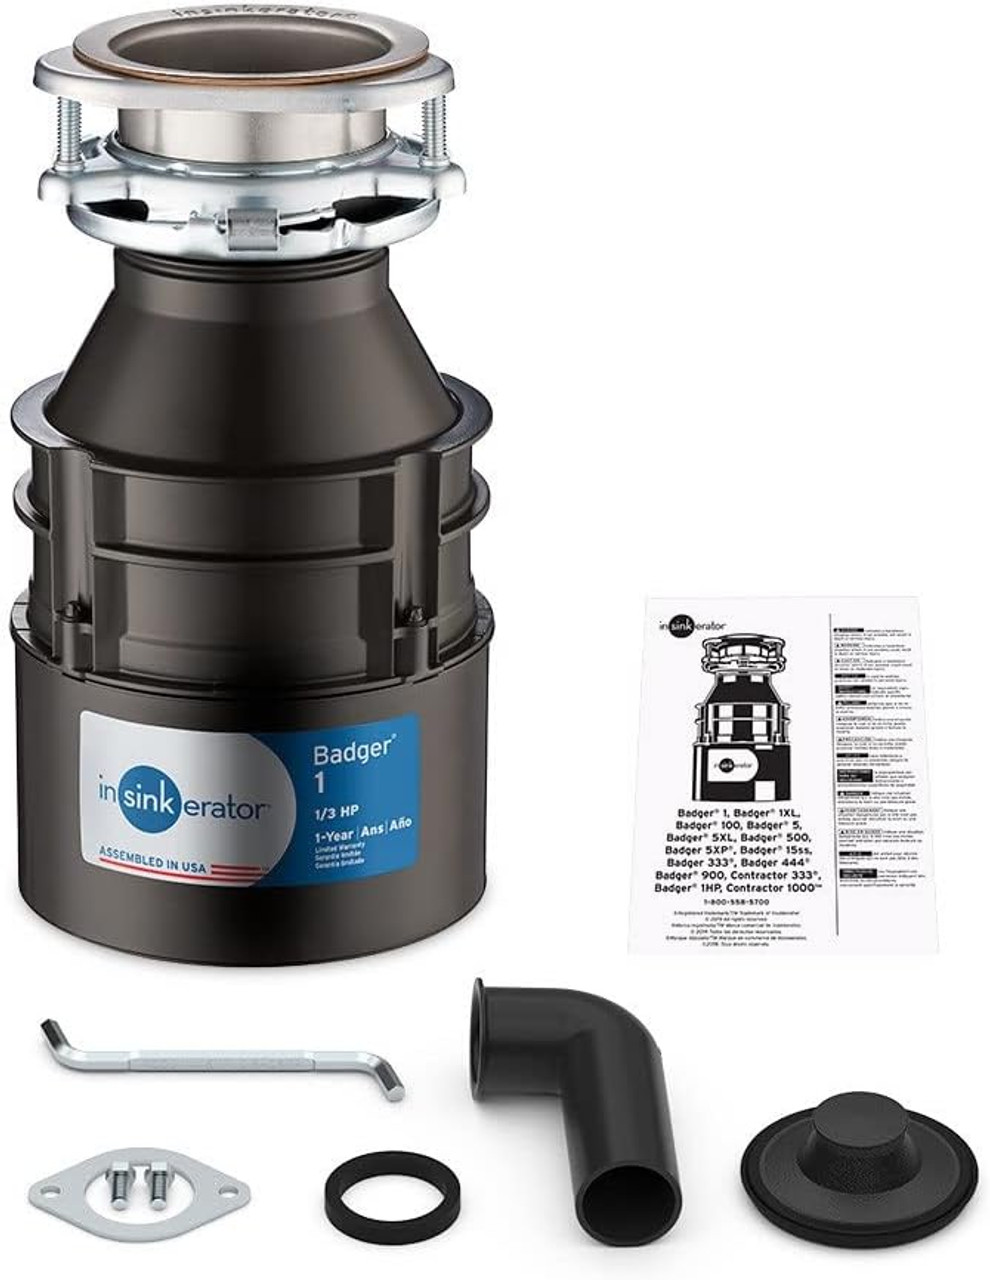 Badger 1 Lift & Latch Standard Series 1/3 HP Continuous Feed Garbage Disposal